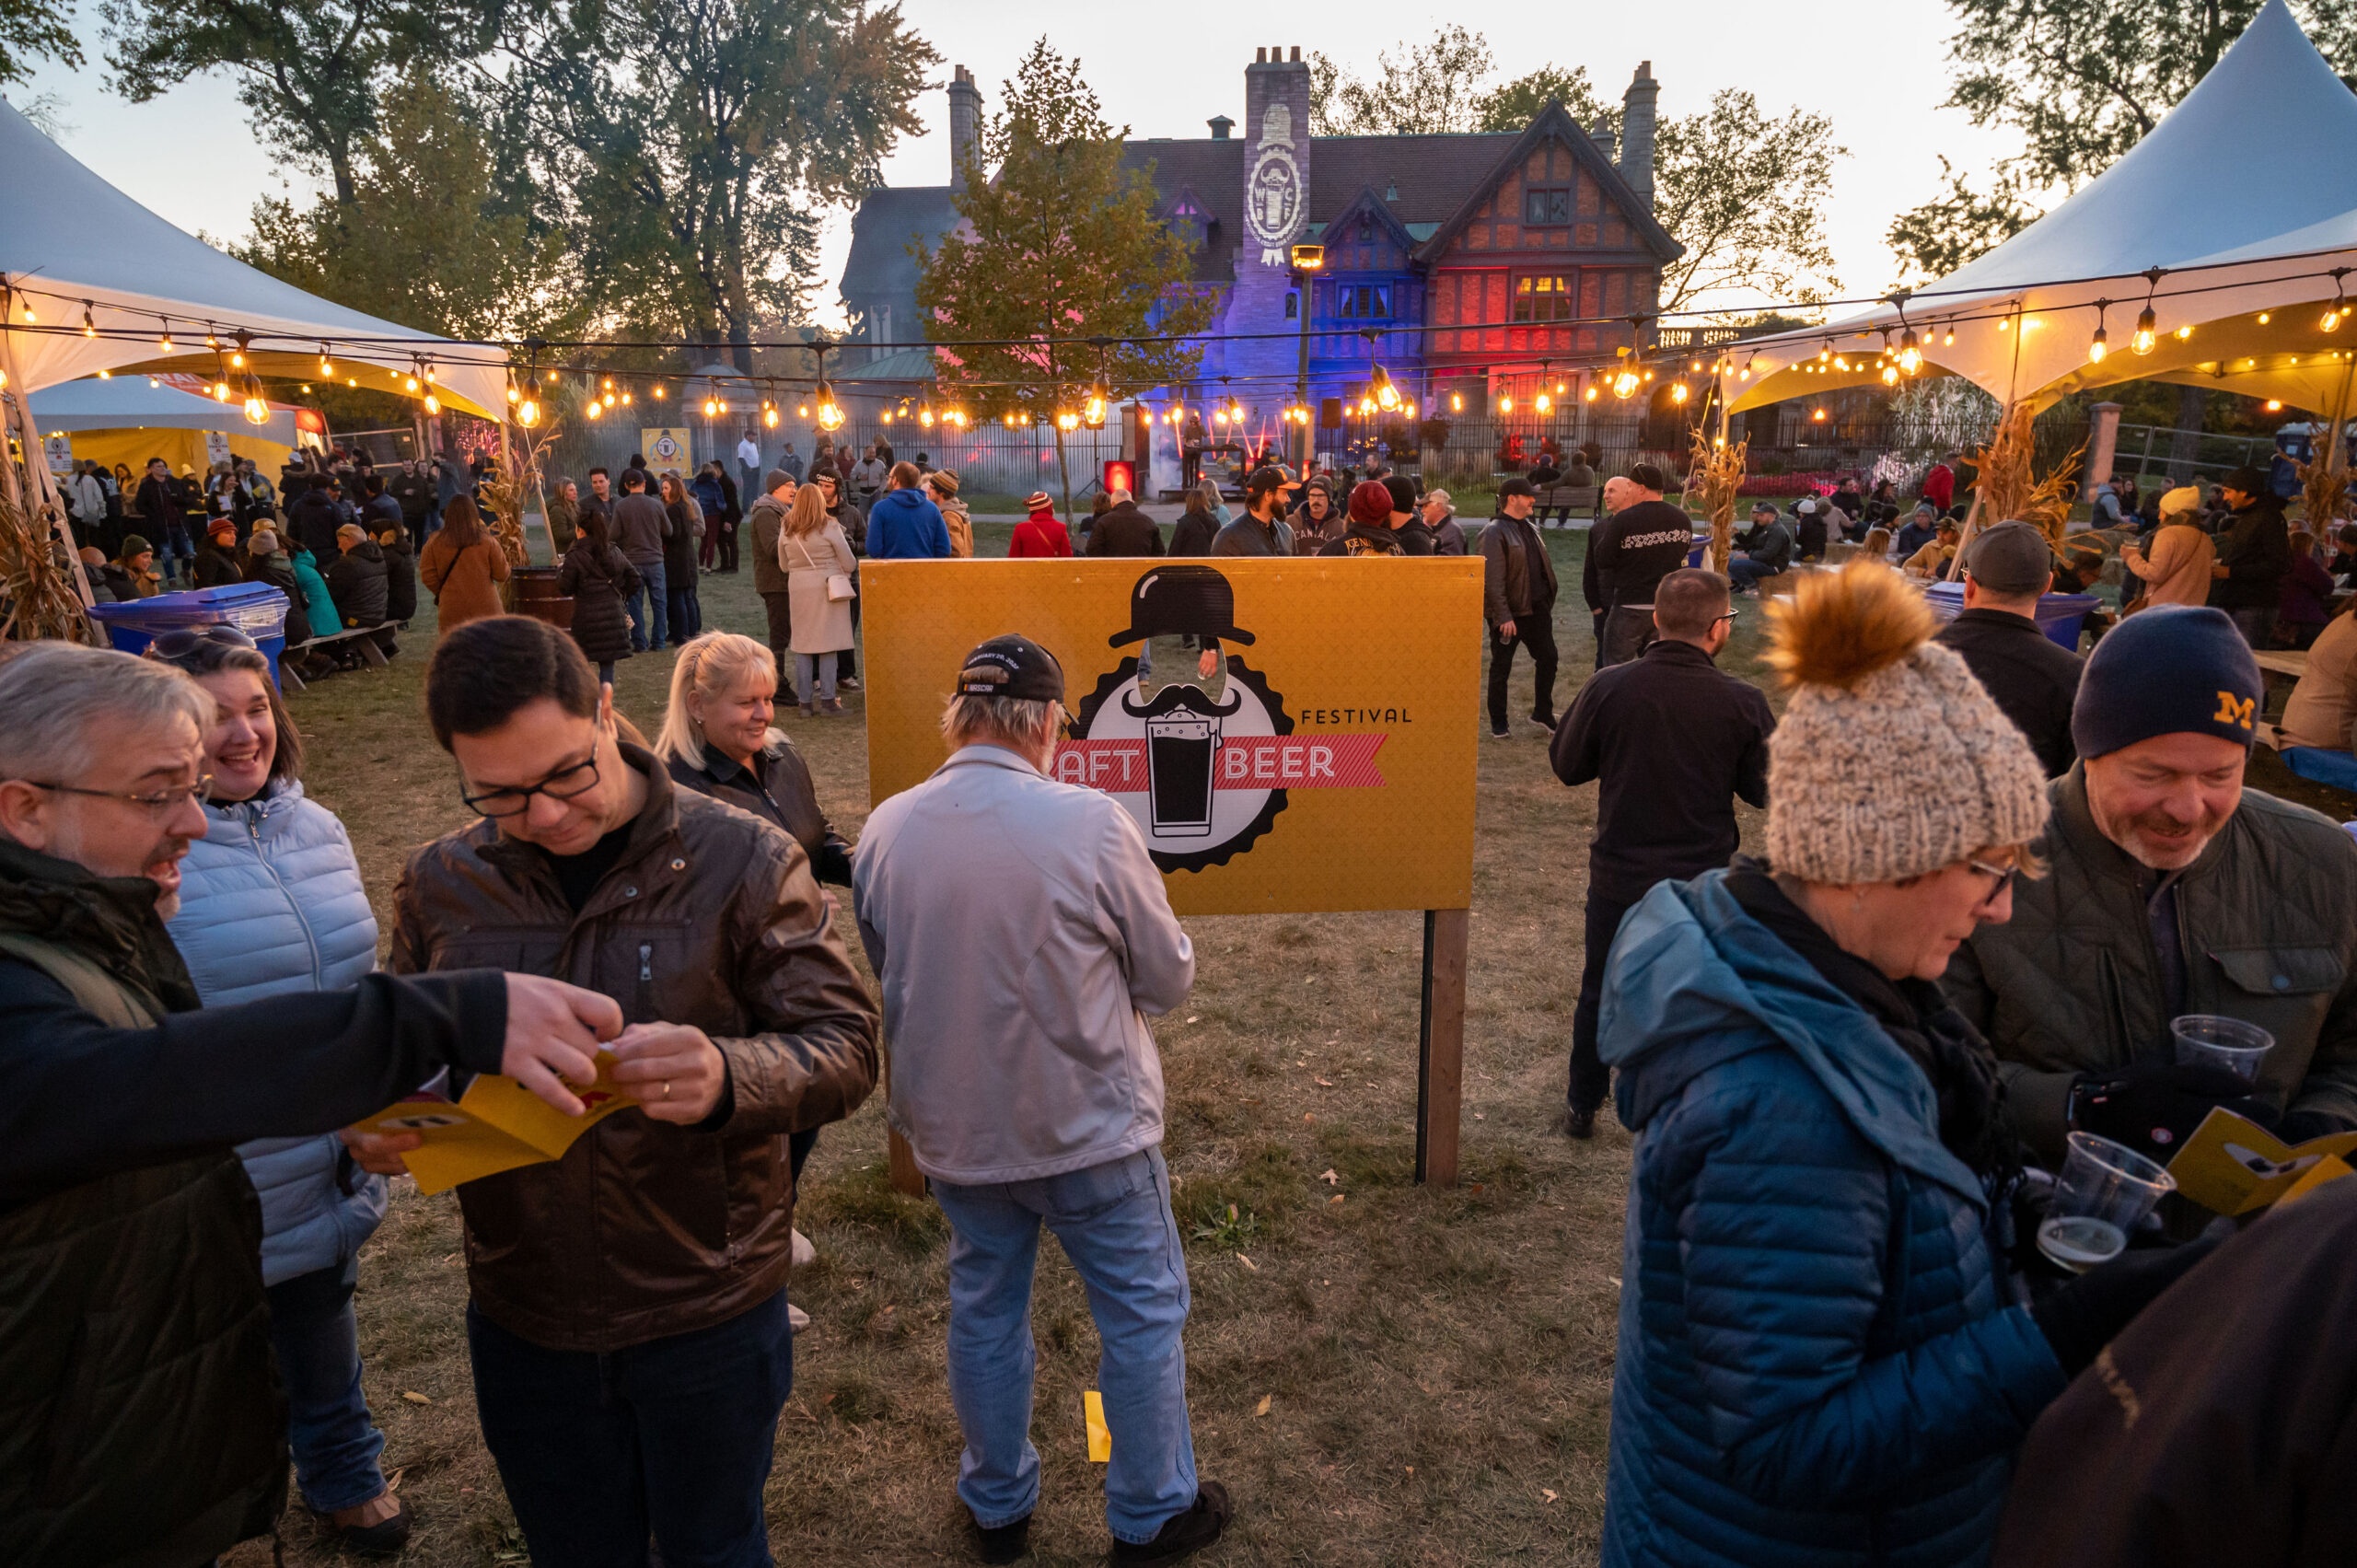 The Windsor Craft Beer Festival takes place in the historic Willistead Park in Windsor, Ontario.